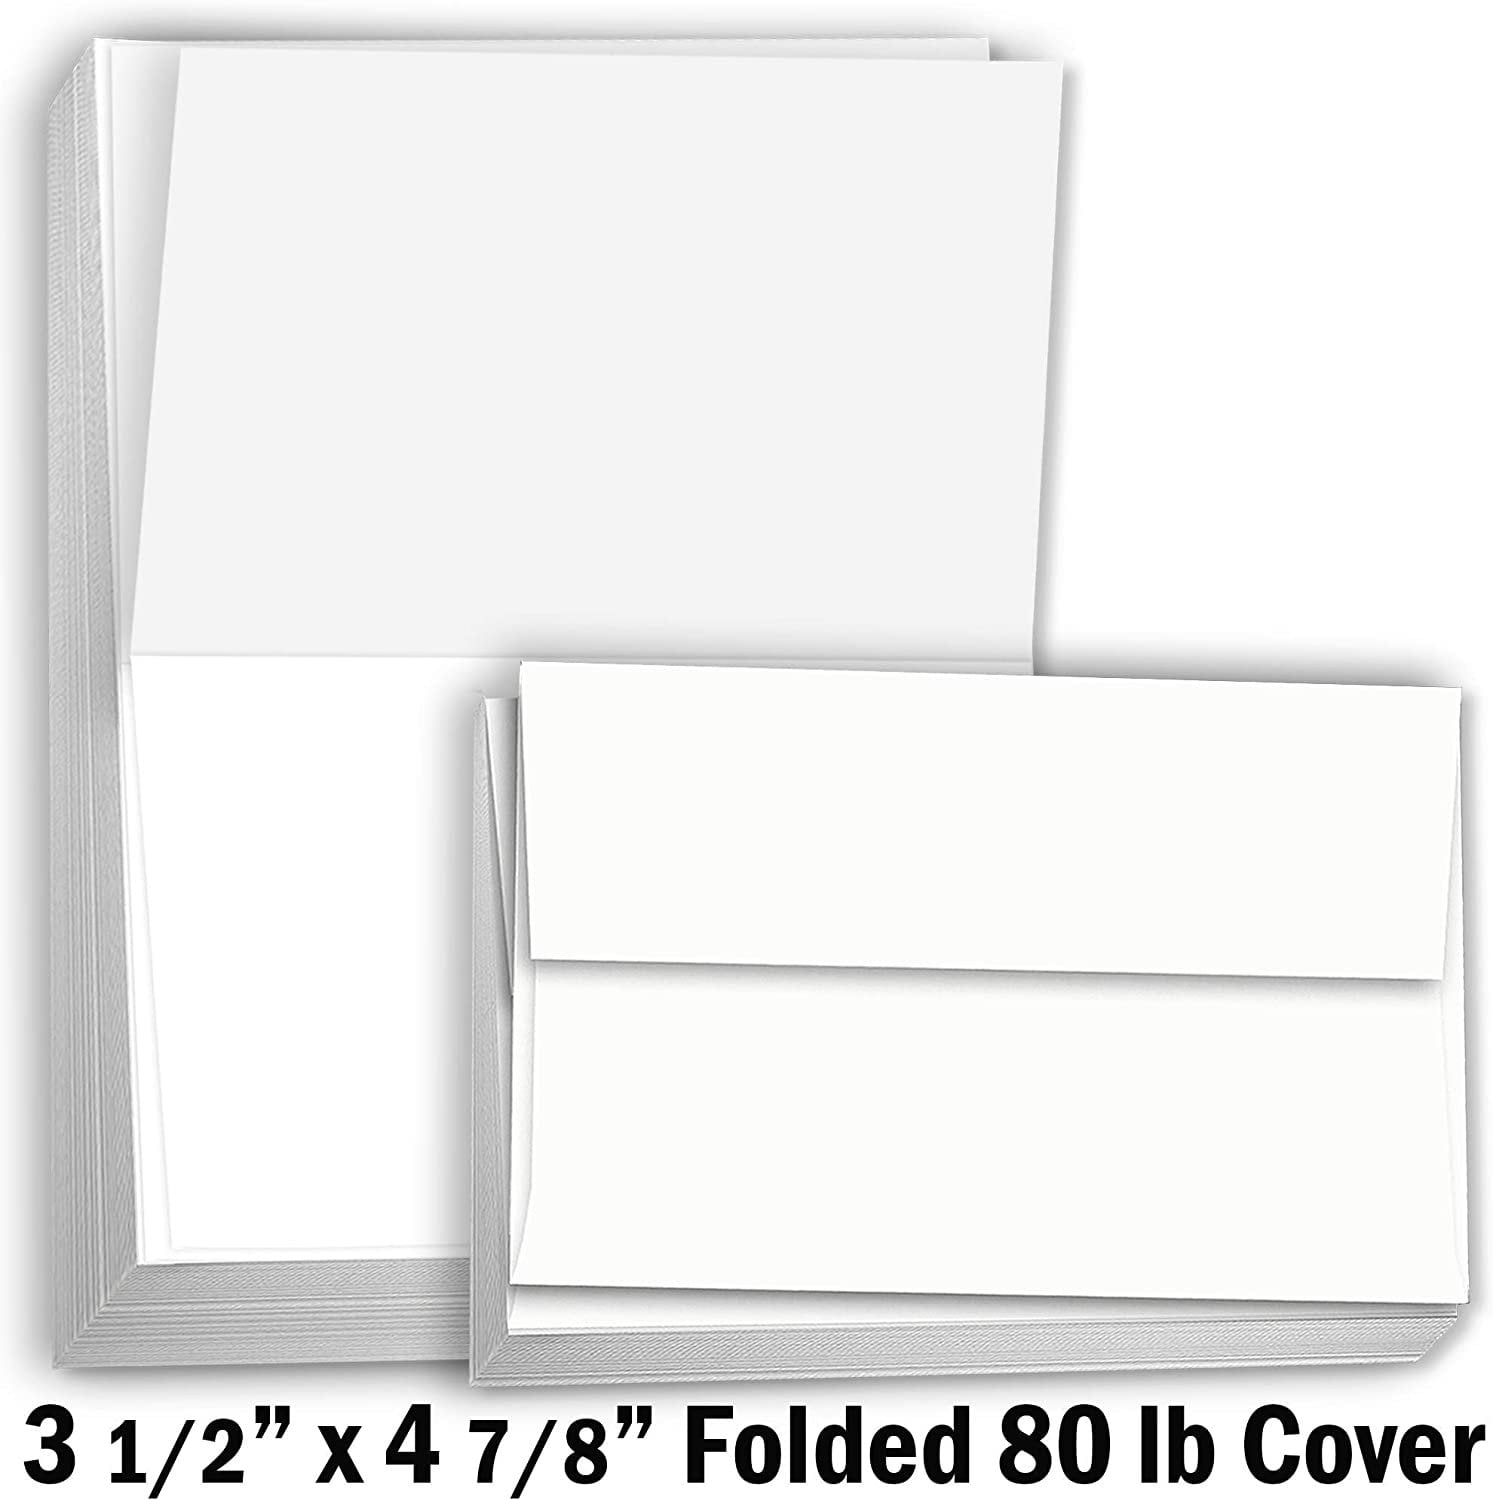 Heavy weight 80 lb Card Stock for Printer 3 1/2 x 4 7/8 Blank Folded Small A1 Cards Greeting RSVP Invitations Stationary 100 Pack Hamilco White Cardstock Thick Paper